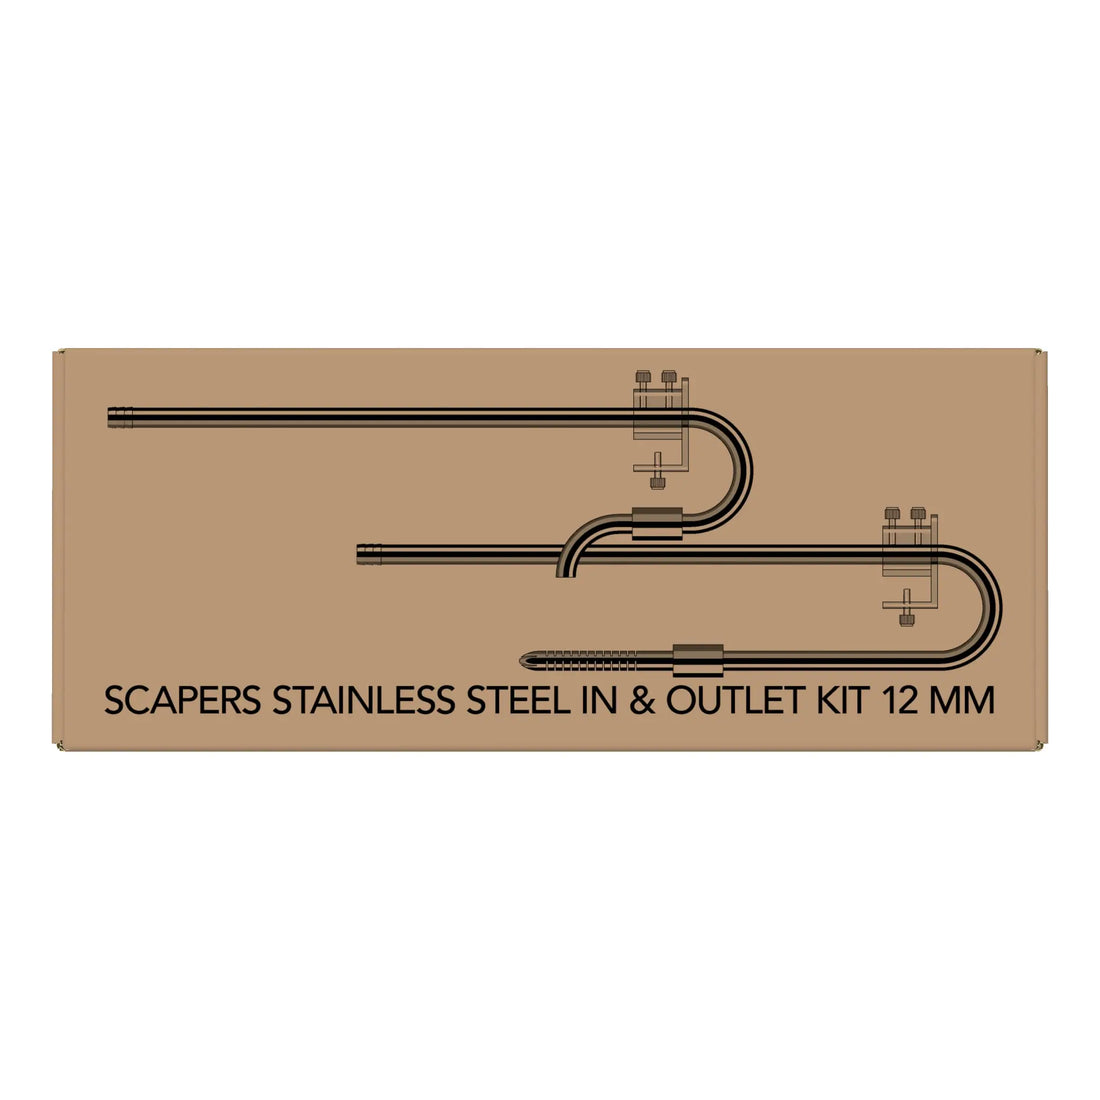 Scapers Stainless Steel Inlet Outlet Kit - Aqua Essentials